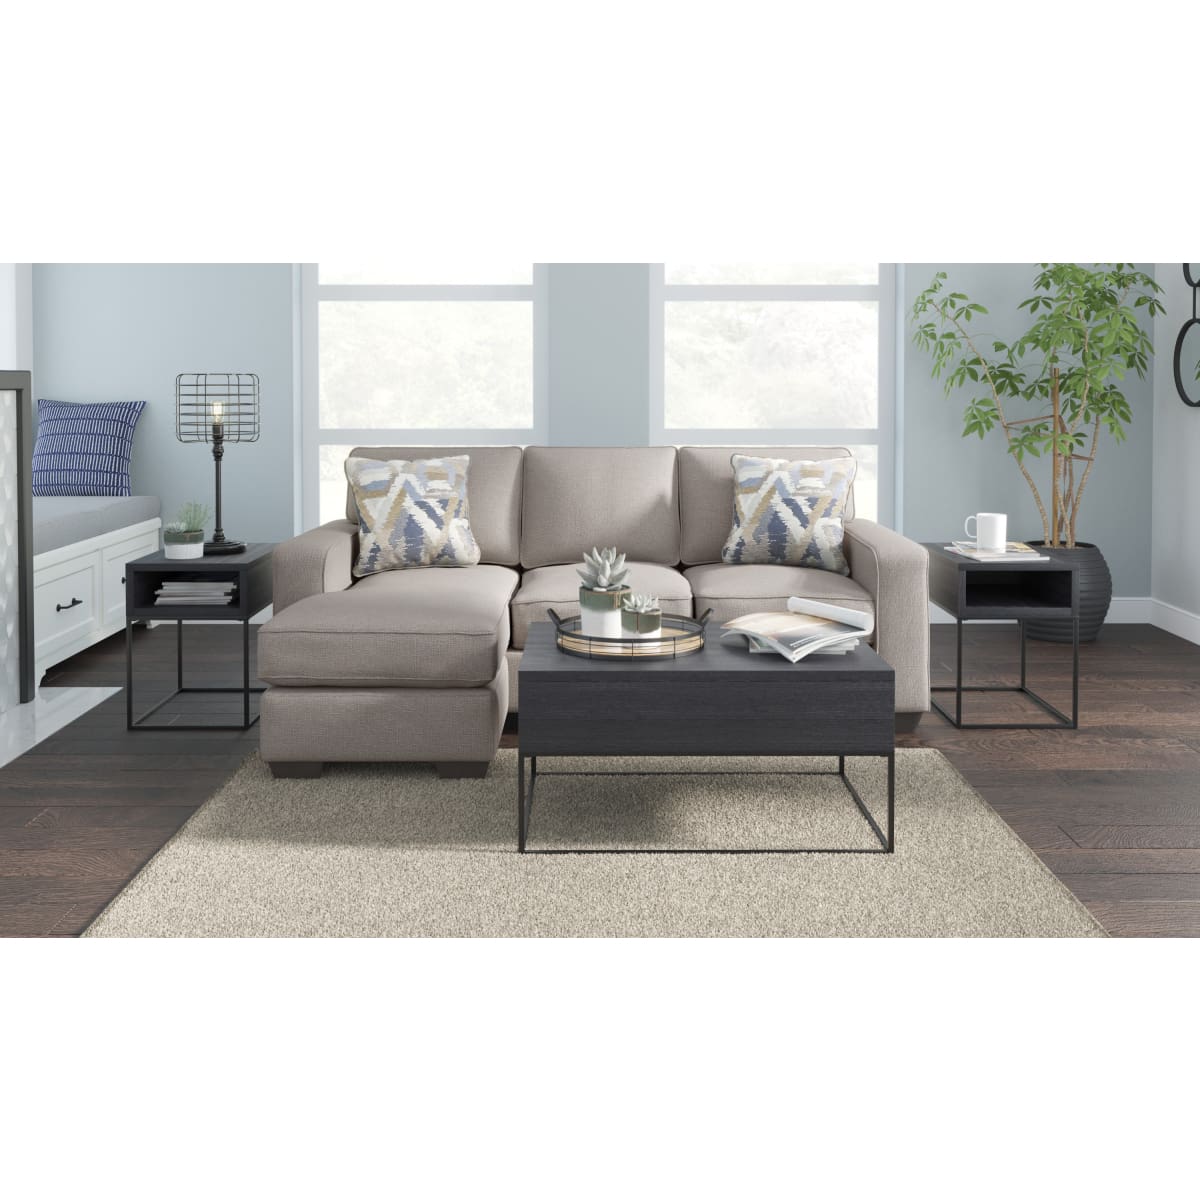 Greave Stone Sofa with Reversible Chaise - Sofa